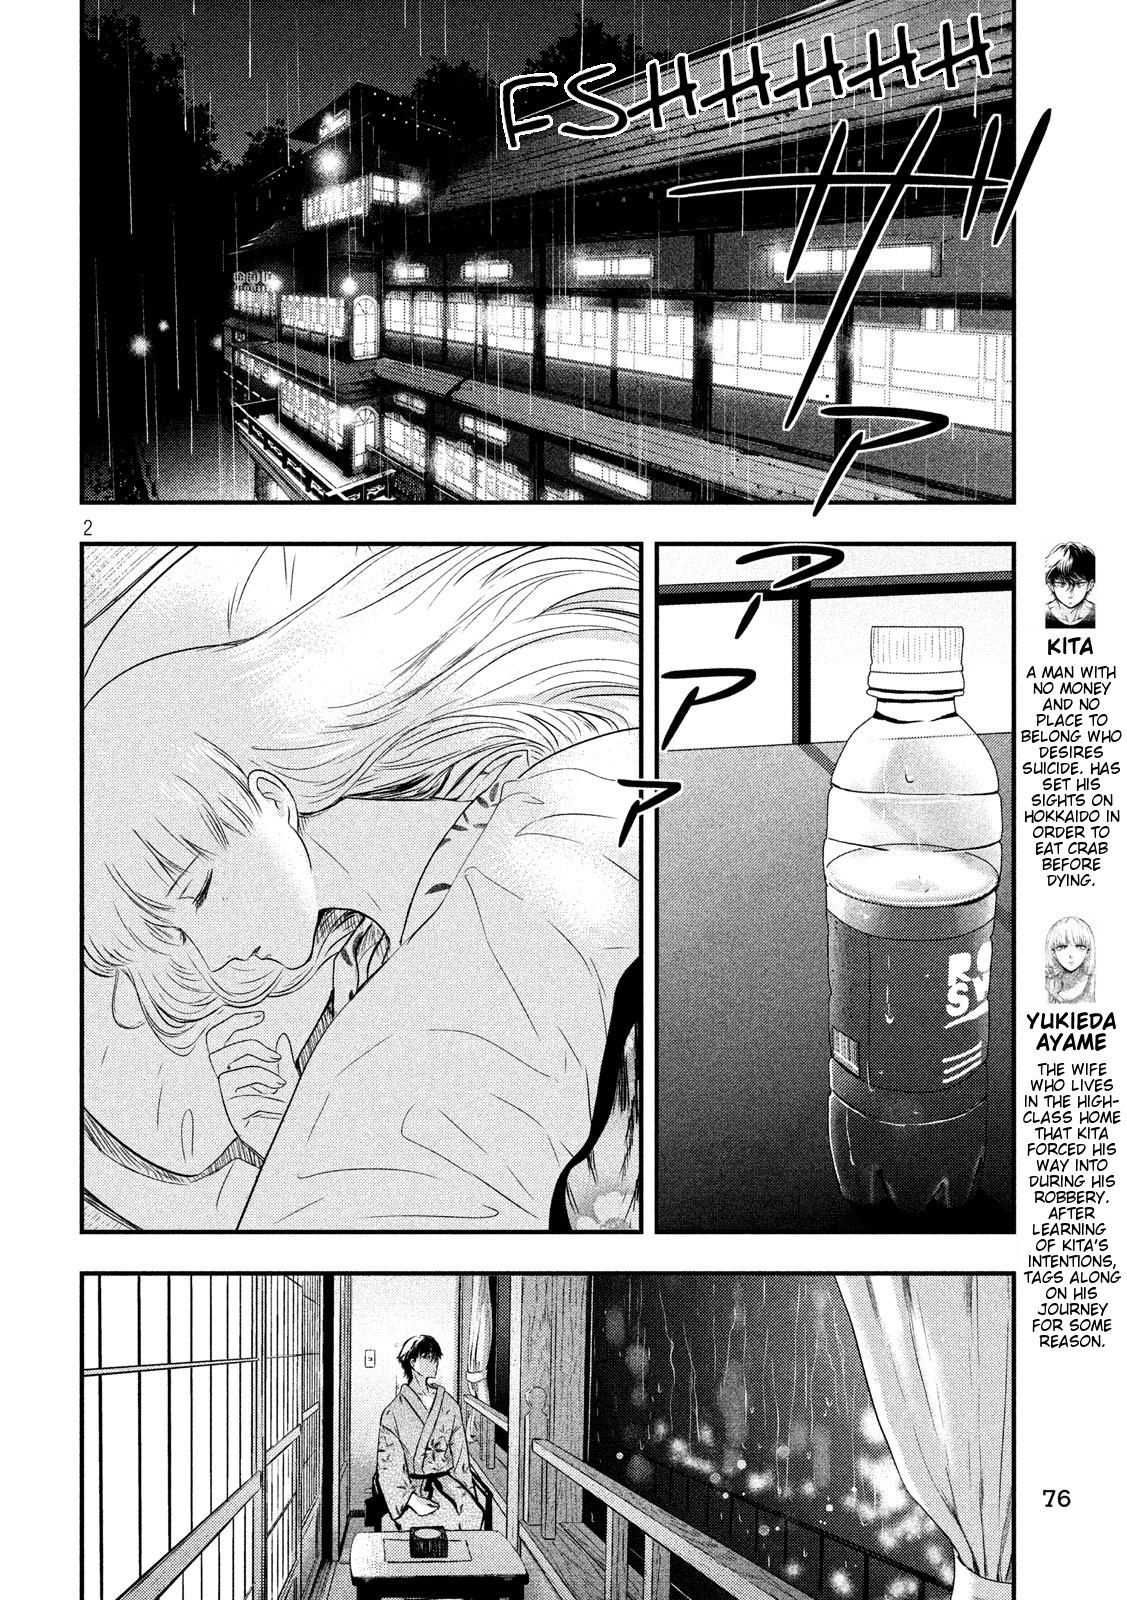 Eating Crab With A Yukionna - Page 2